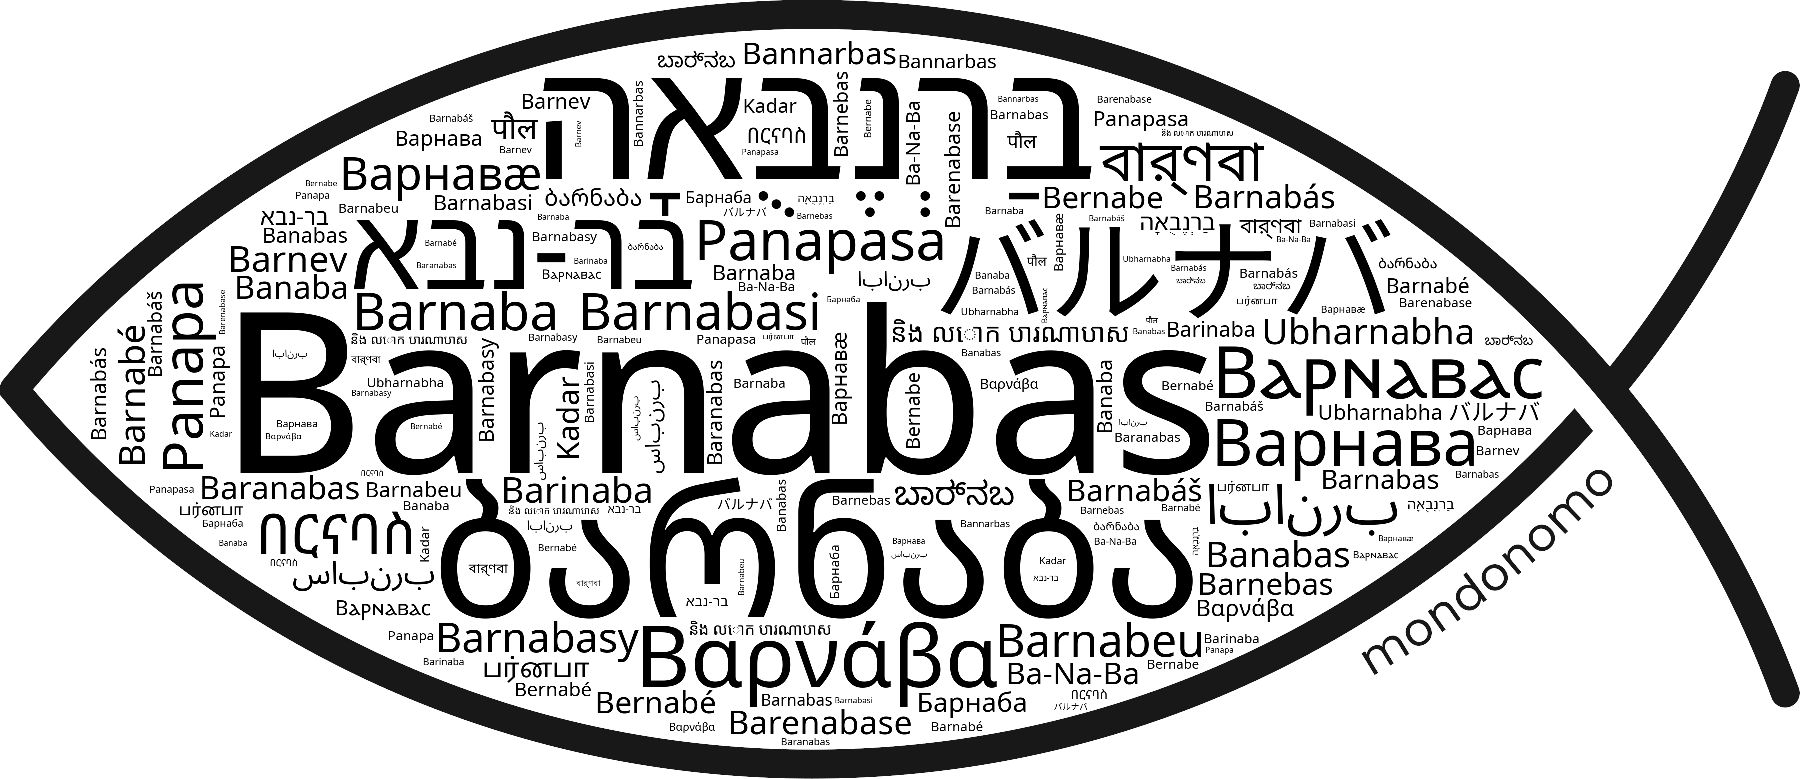 Name Barnabas in the world's Bibles